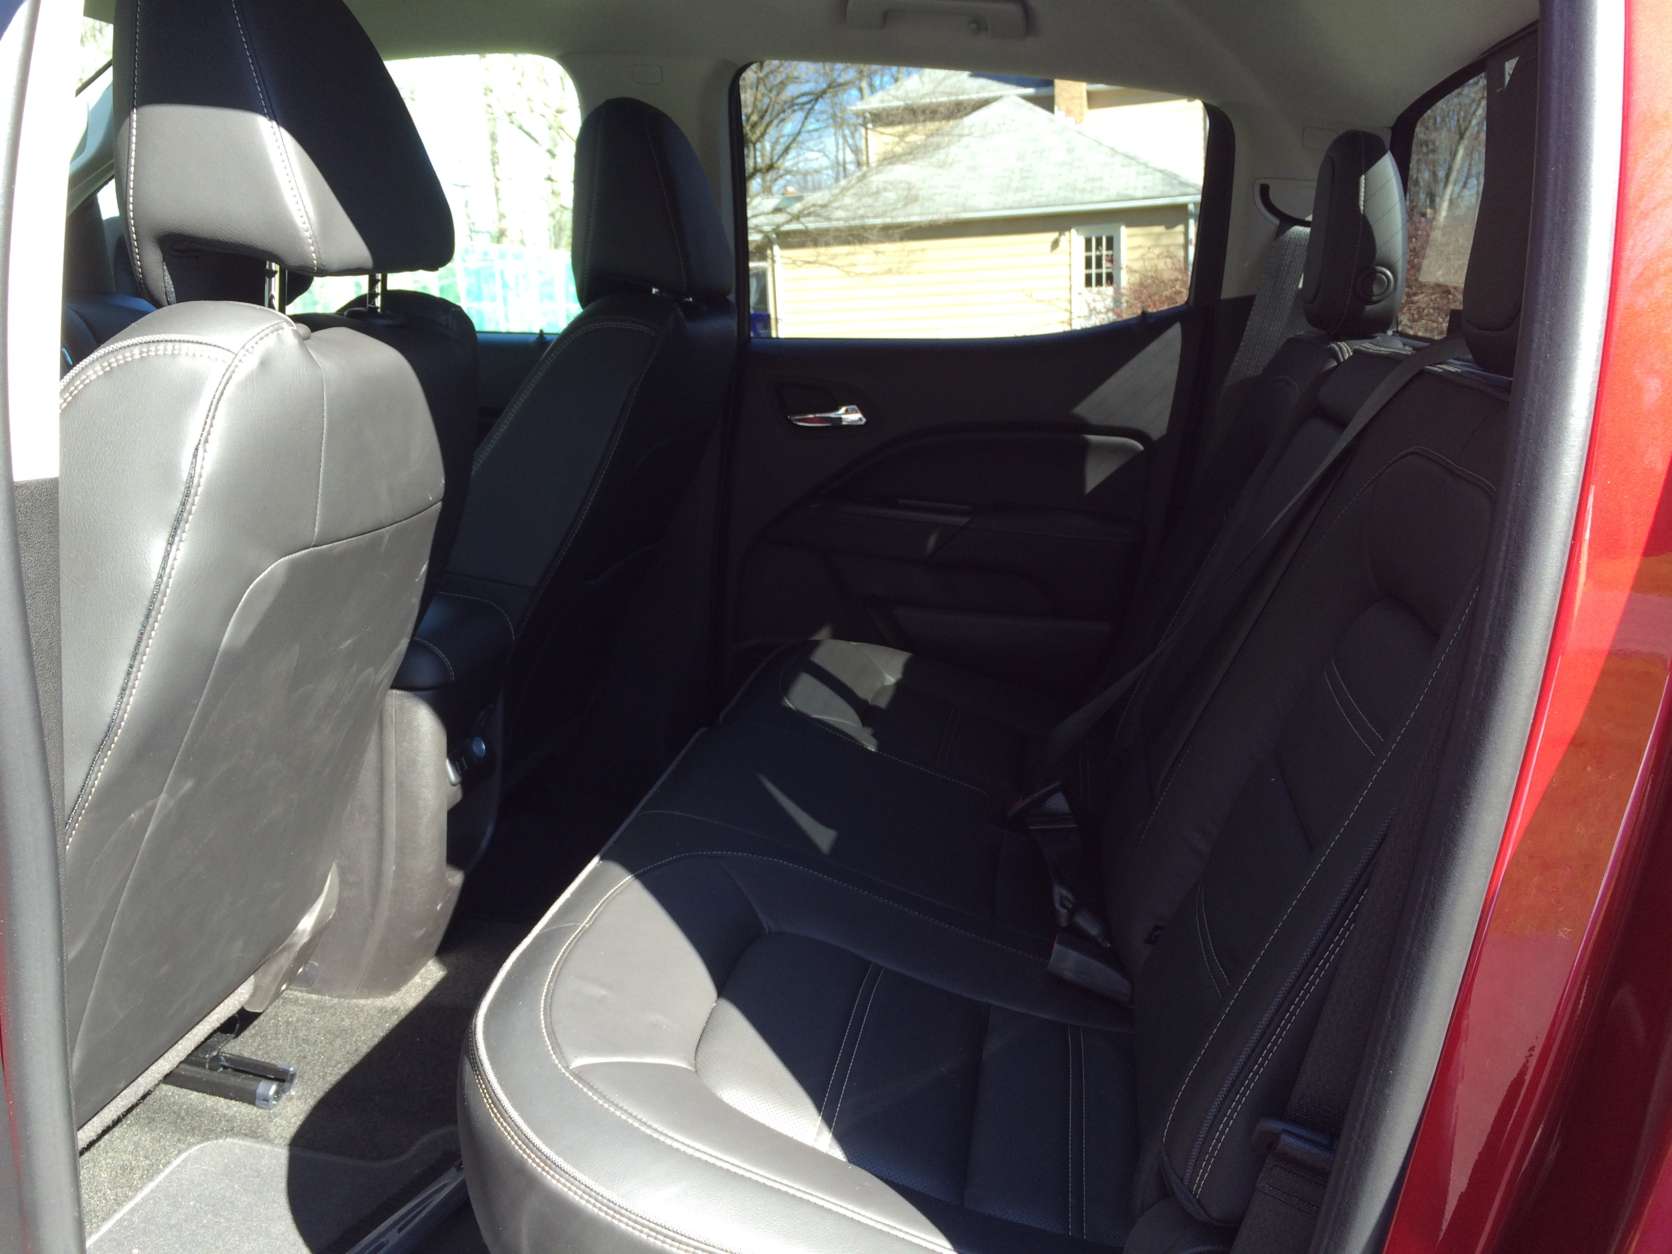 . The seats are covered in leather and offer heat and ventilation with good comfort. The heated steering wheel is also a nice touch. With room for five, the space is good for a smaller pickup. (WTOP/Mike Parris)